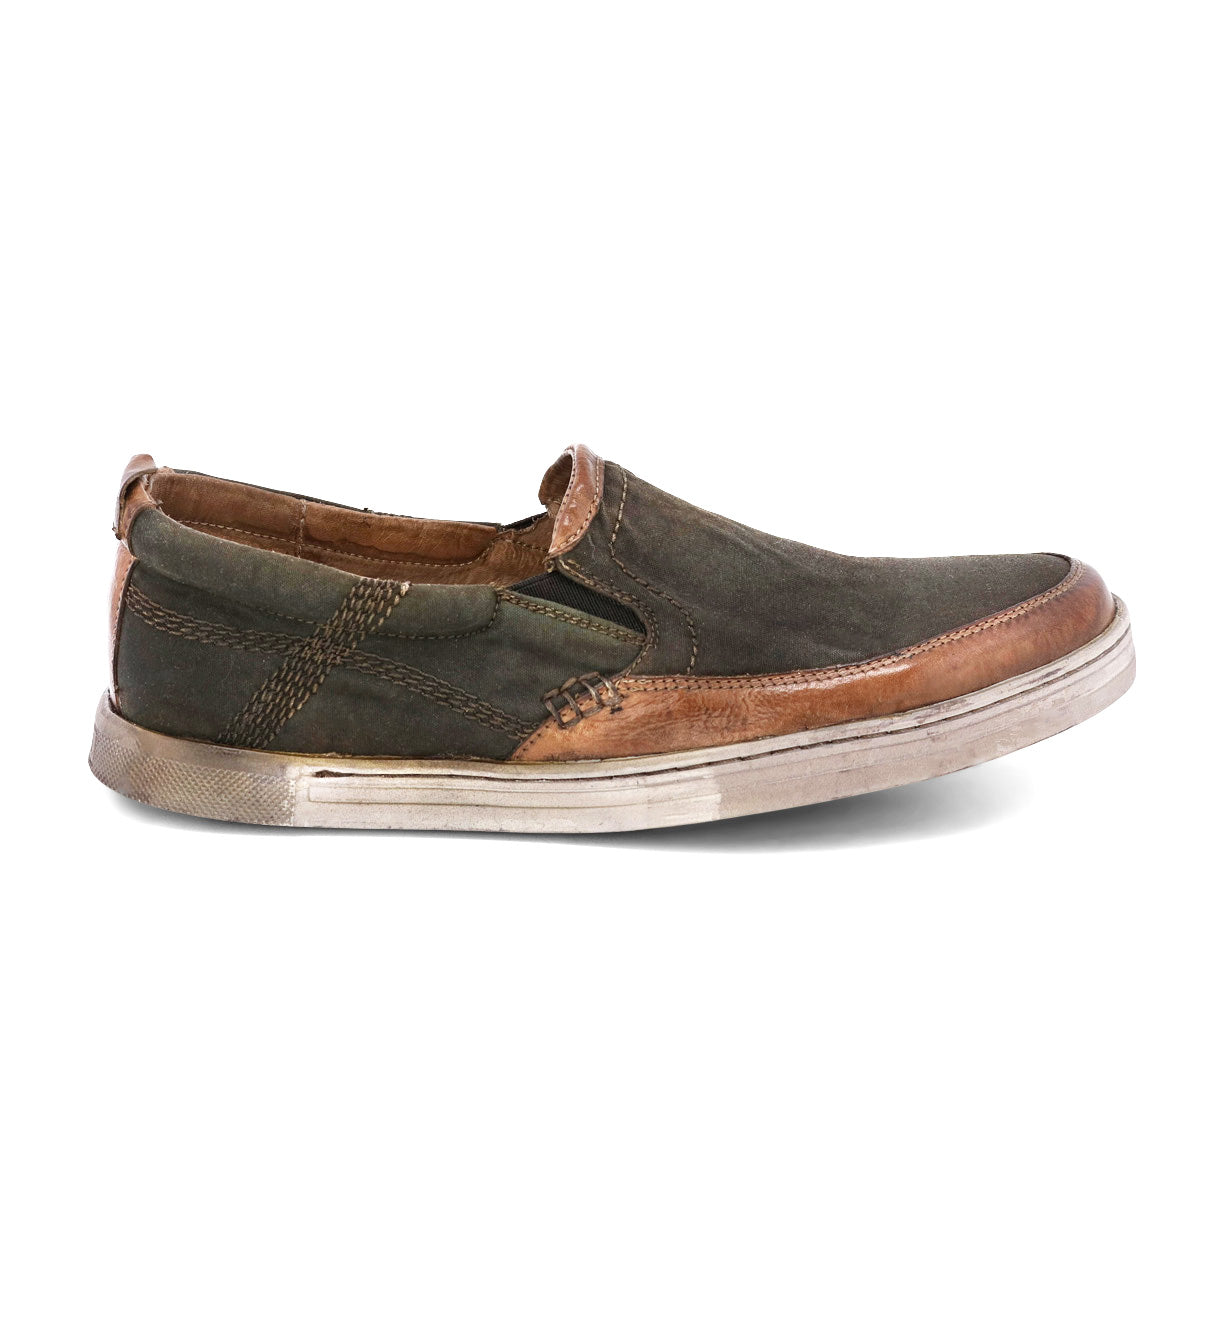 A men's slip on Carp shoe in green and brown by Bed Stu.